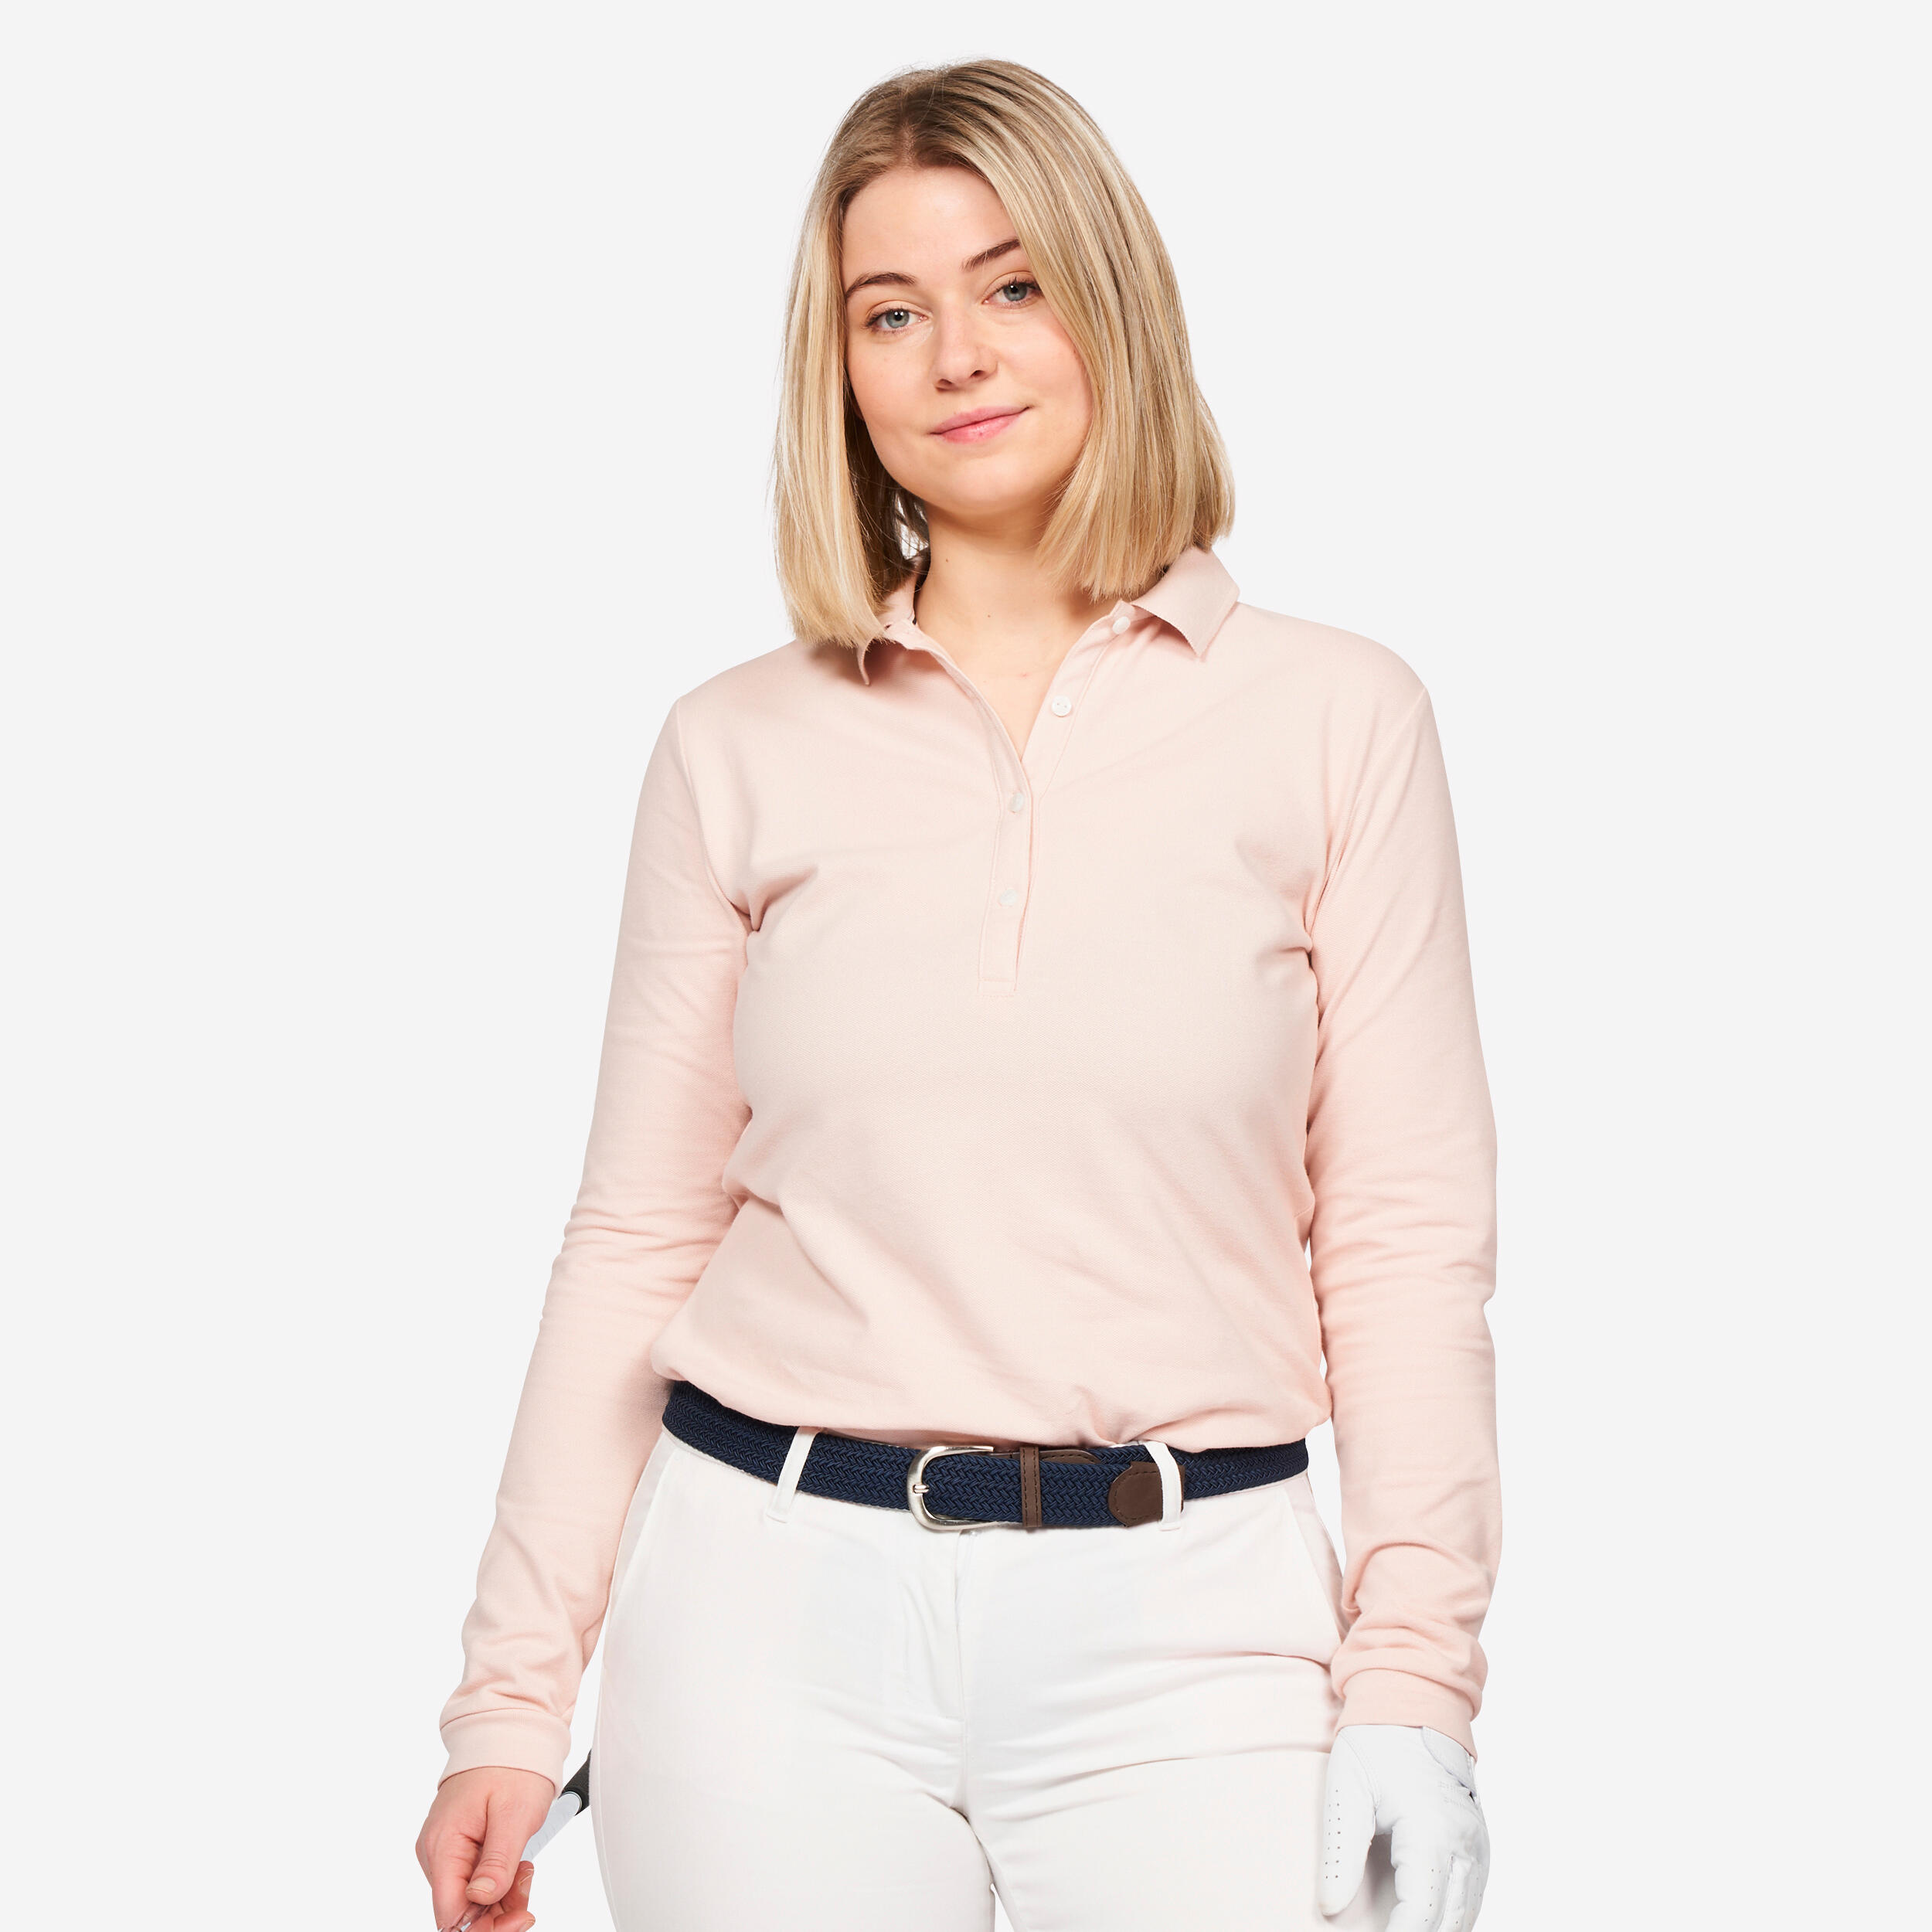 Women's golf polo long sleeved - MW500 pink 1/5